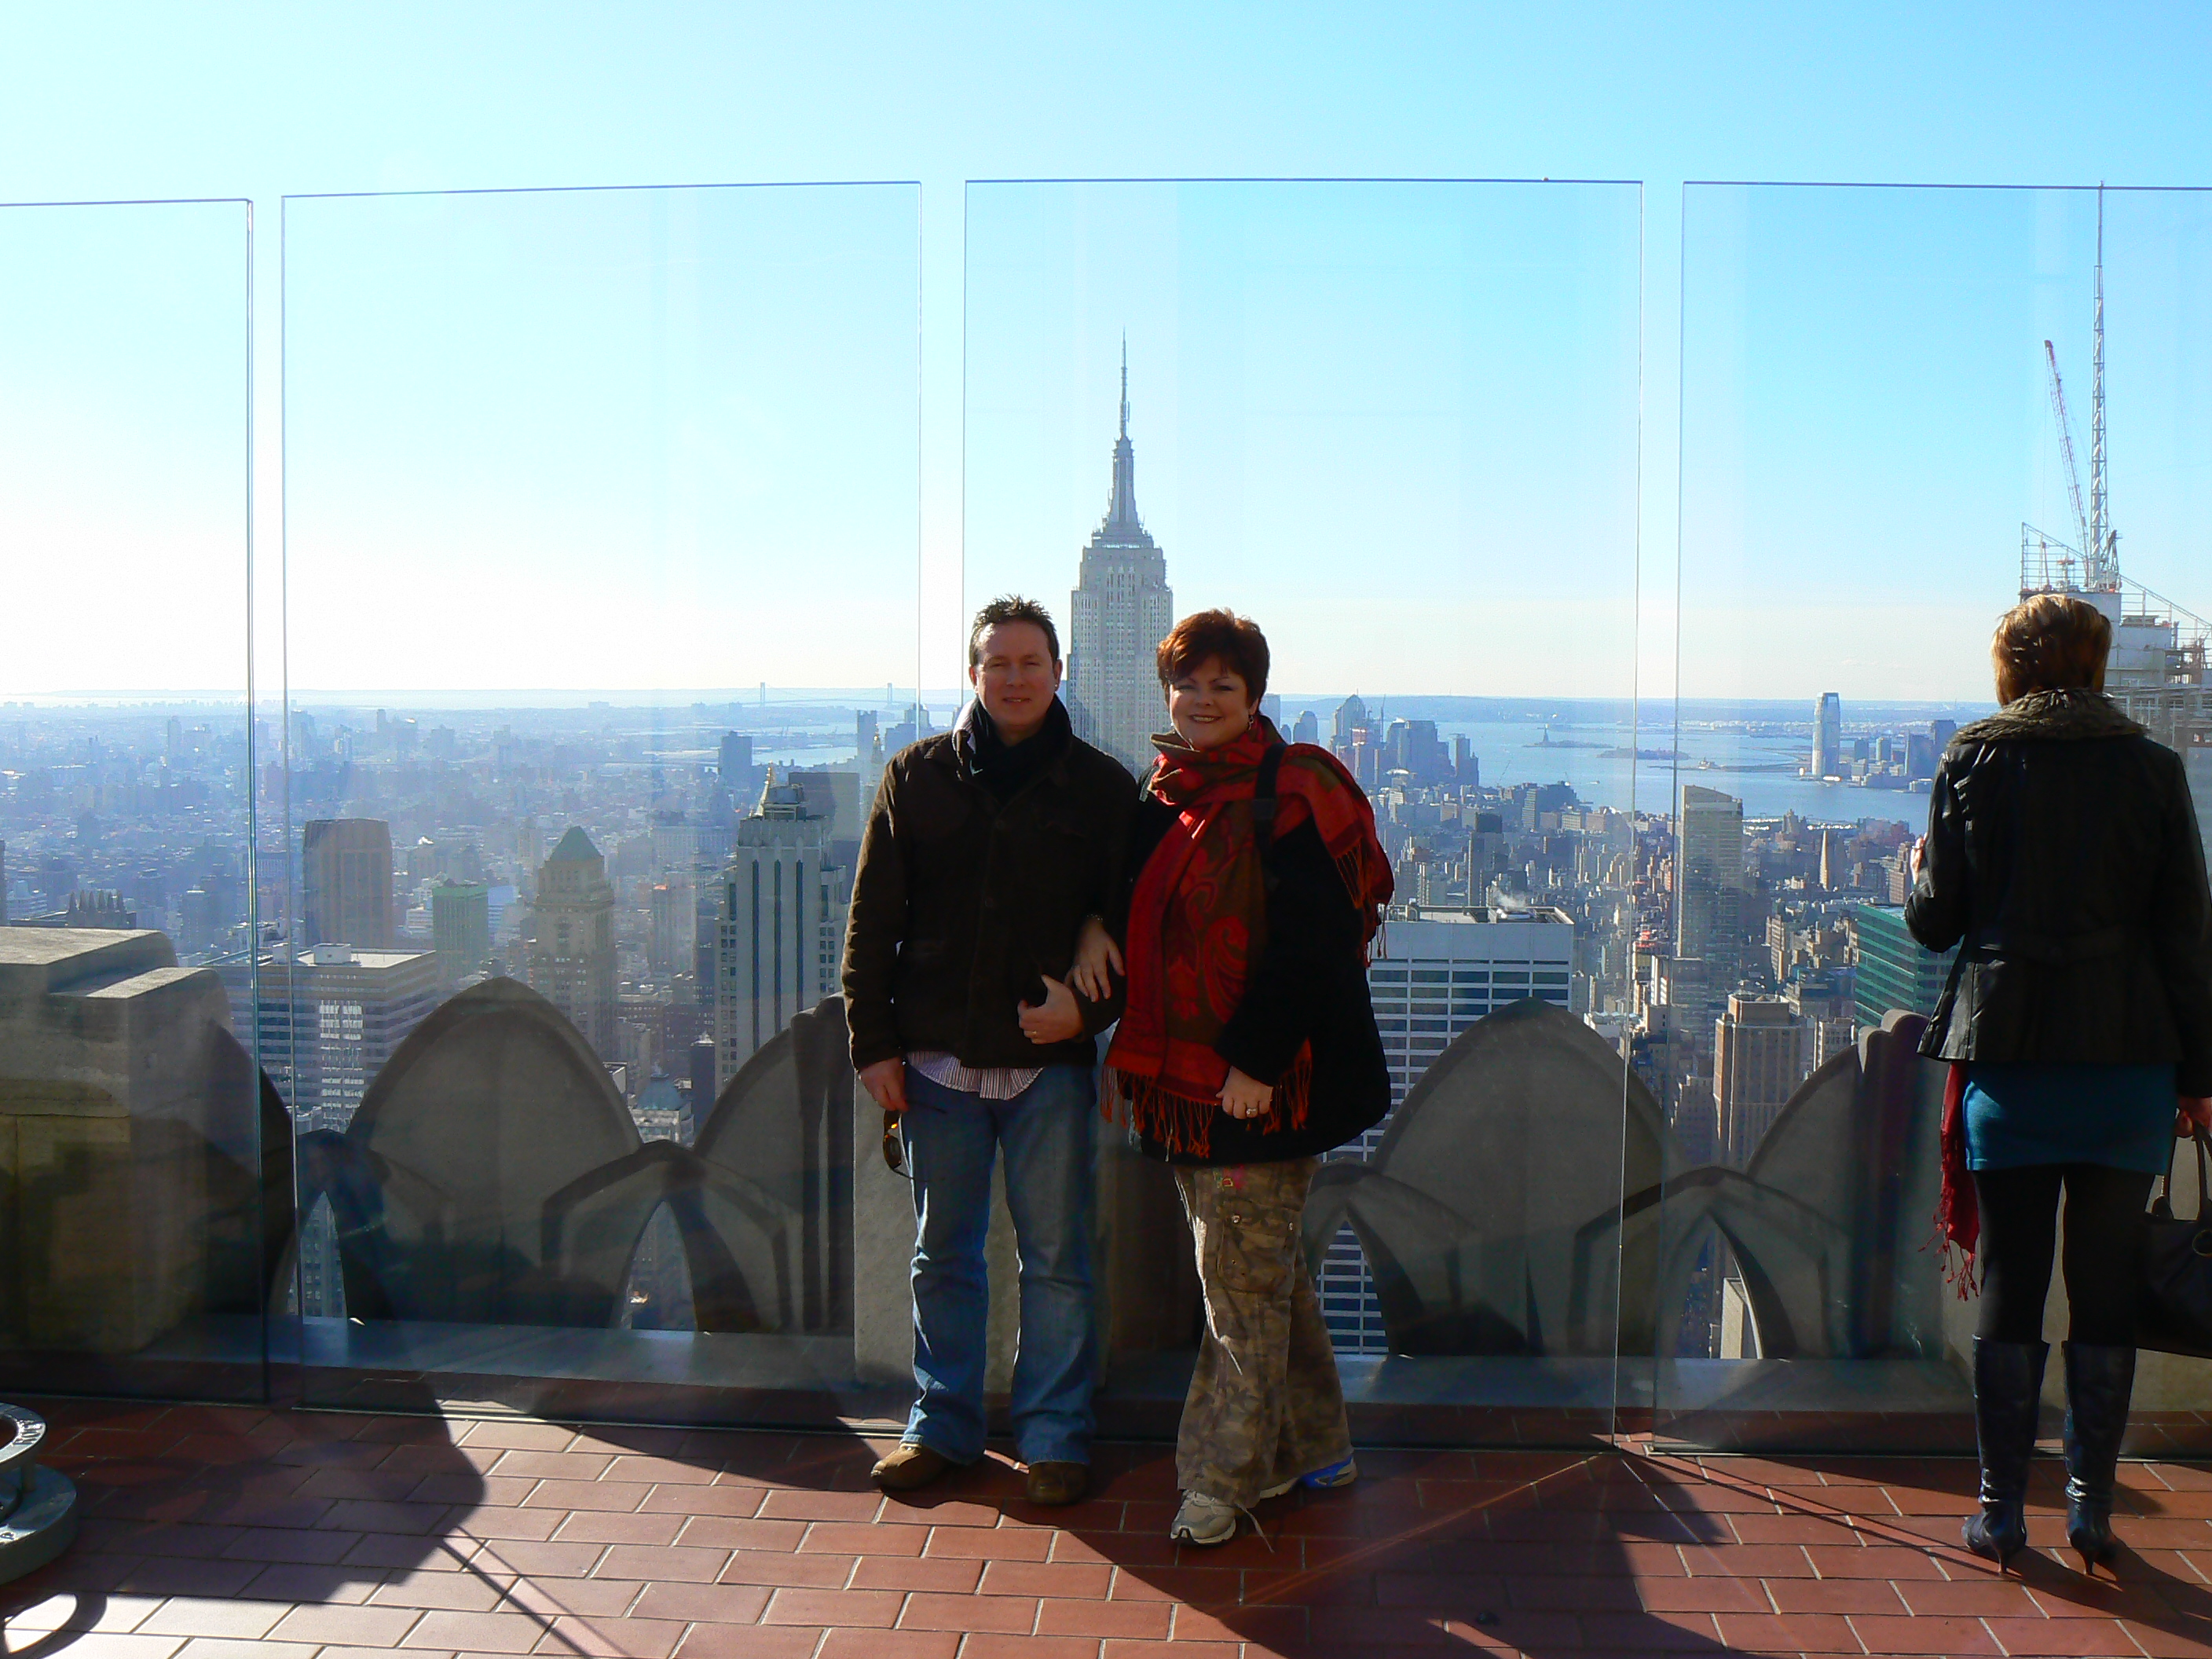 Taken on "The top of the Rock" - The Rockerfeller Centre.